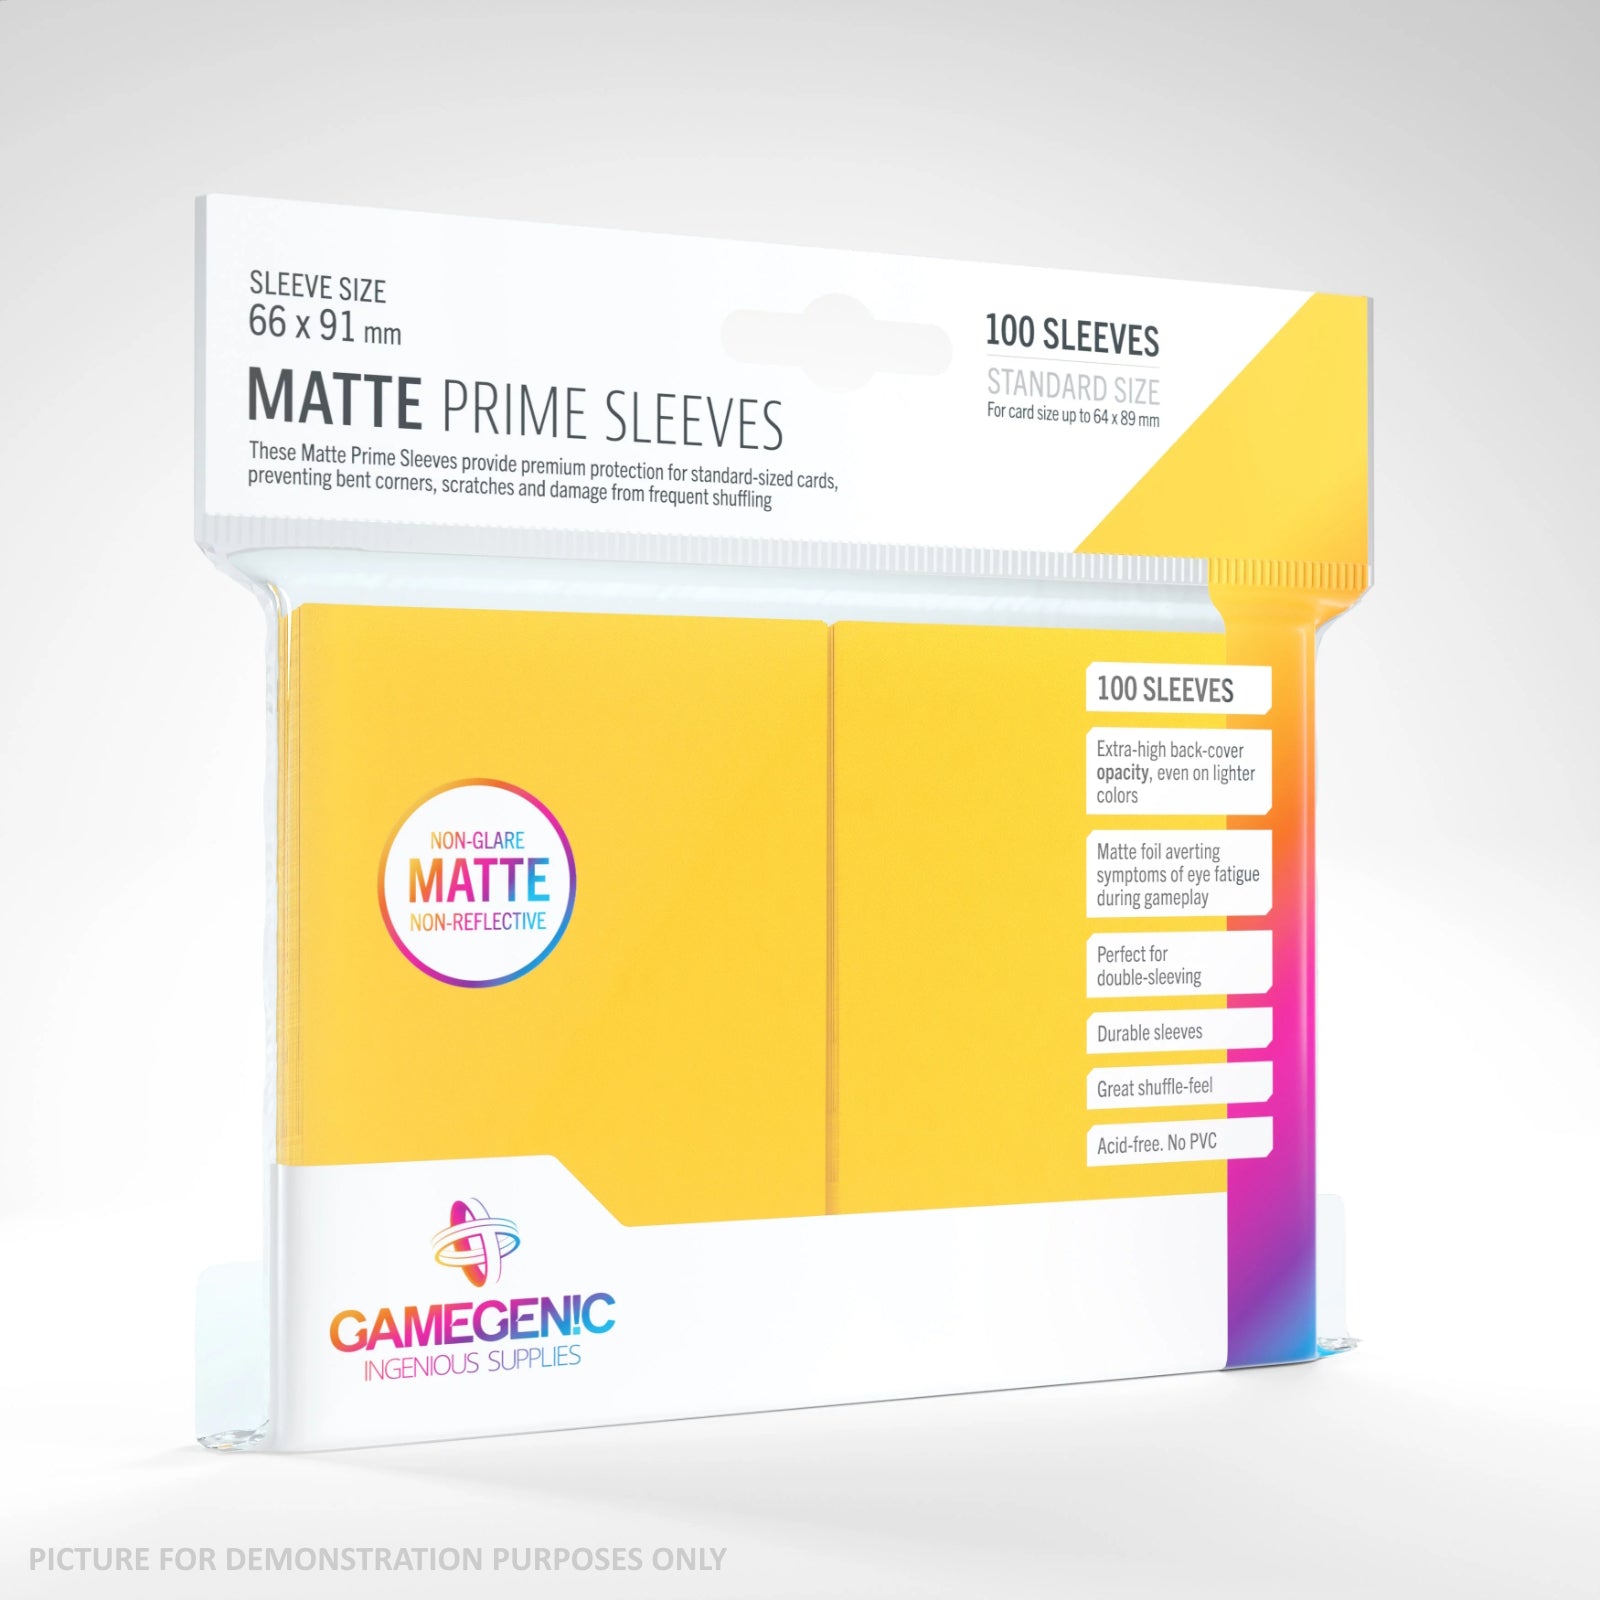 GameGenic MATTE Prime Sleeves 100 Pack - YELLOW